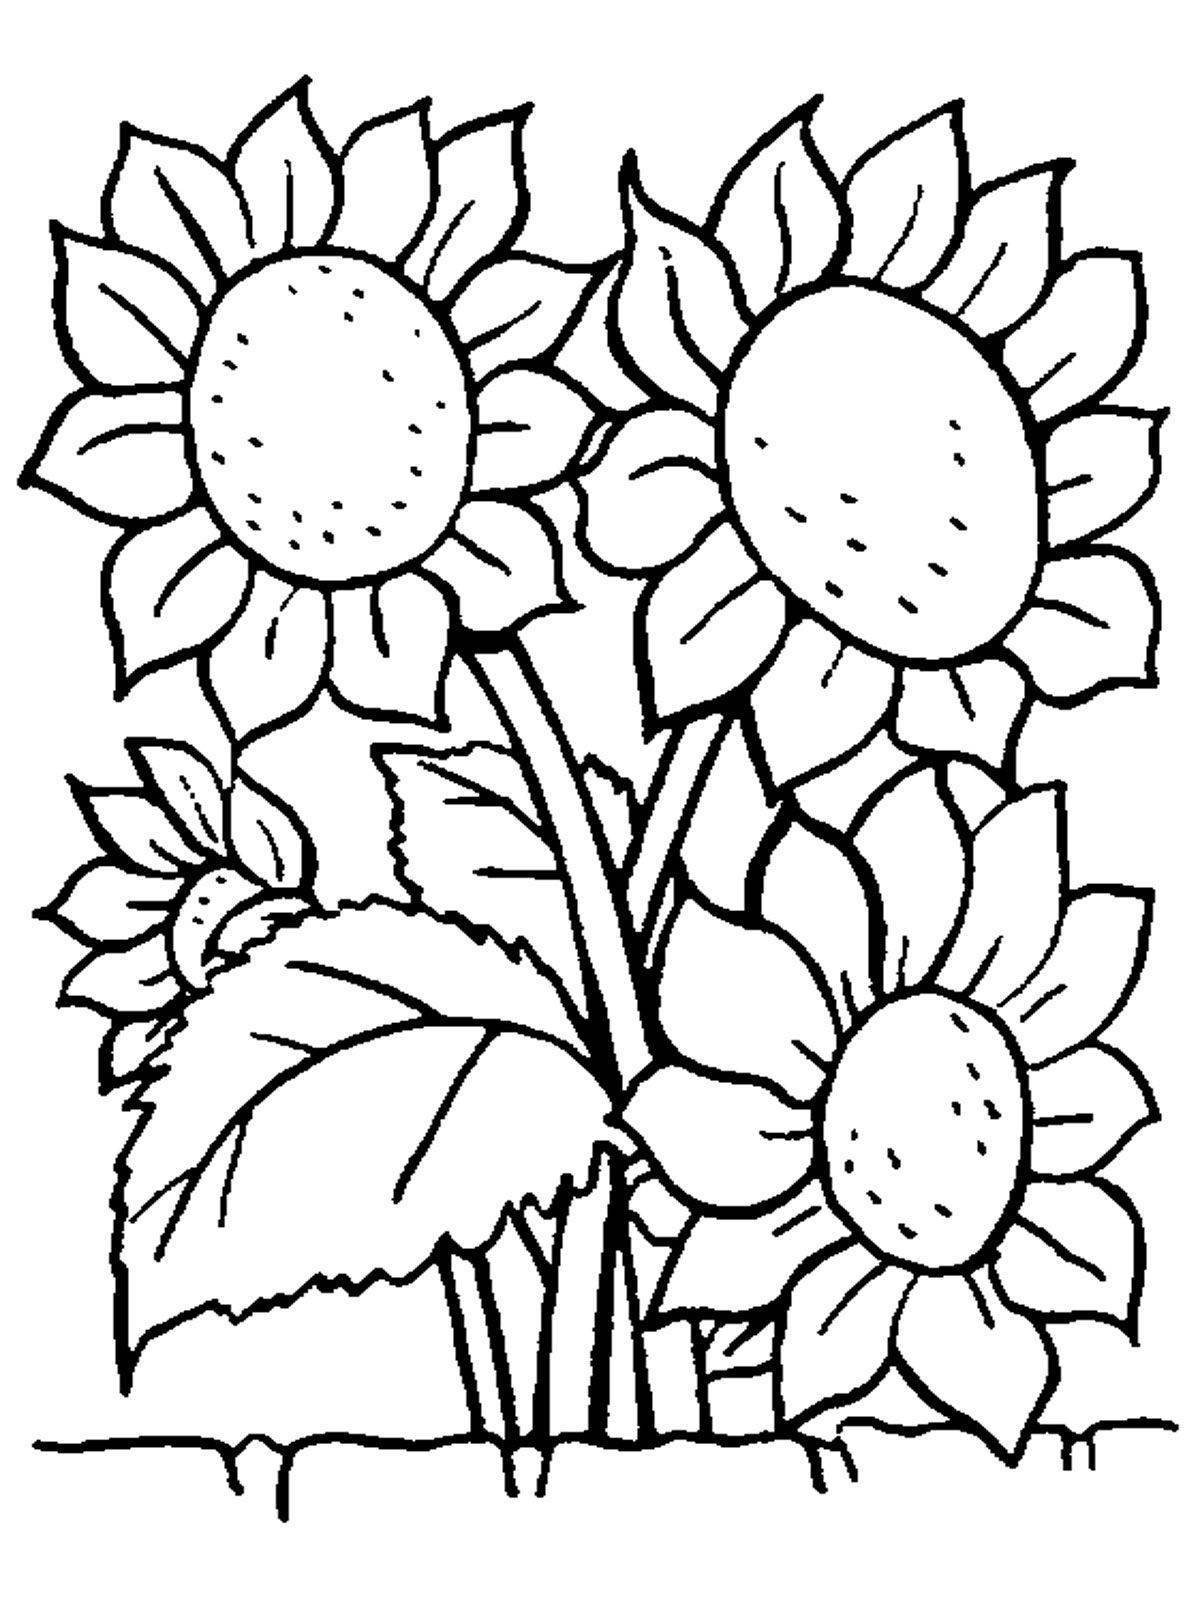 Radiant coloring flowers for children 6-7 years old